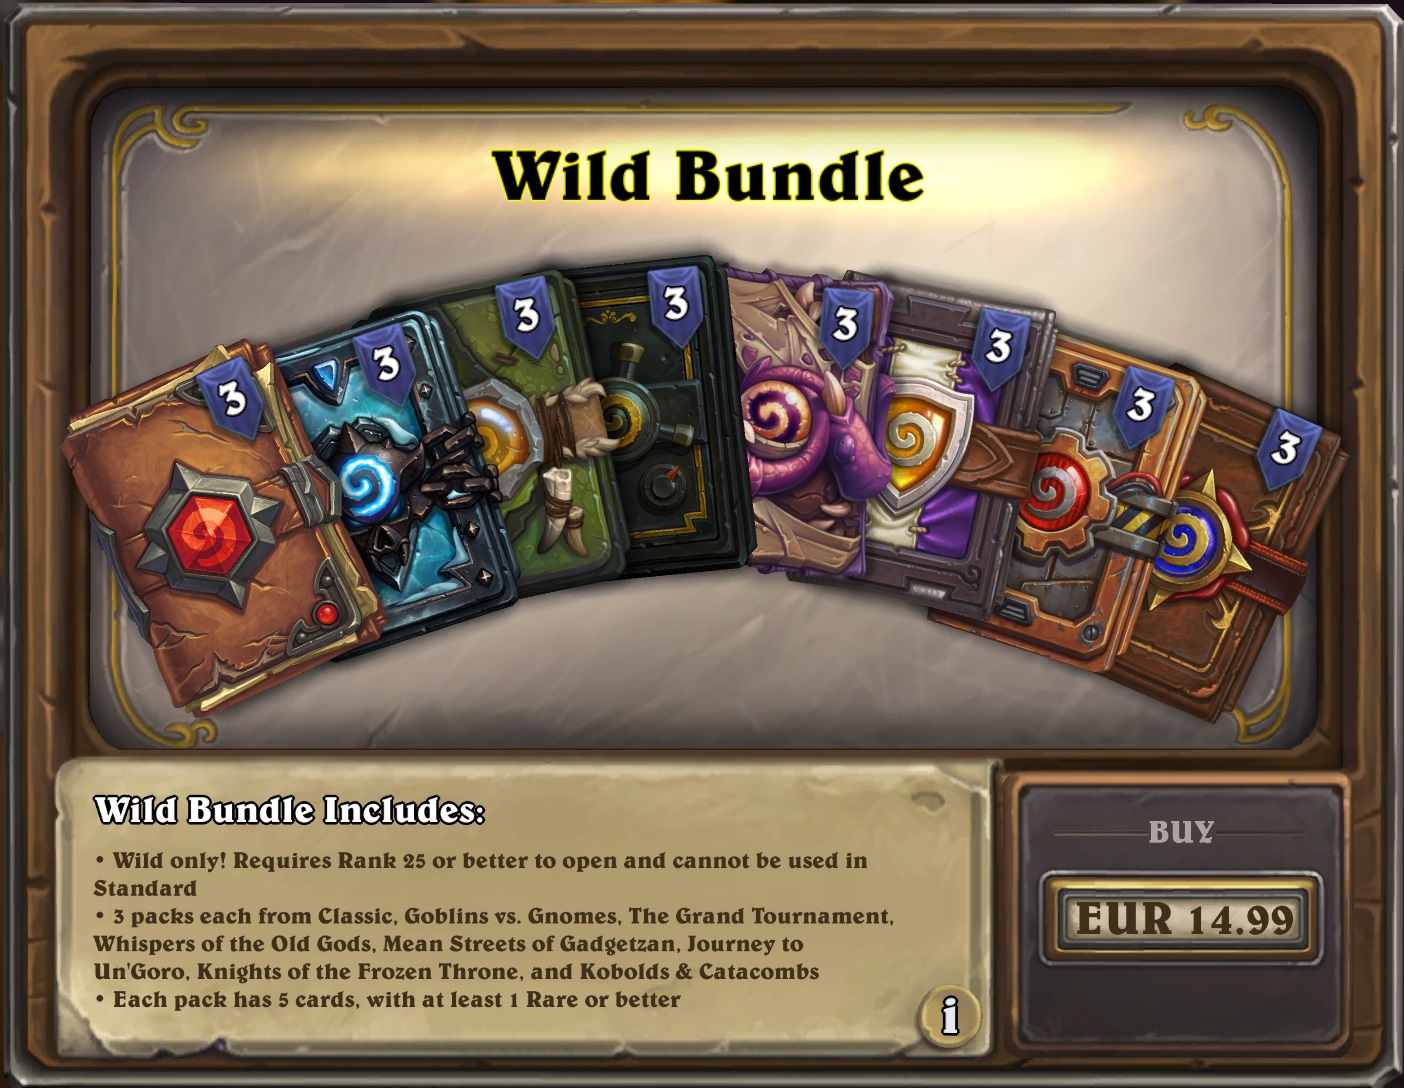 Wild Bundle Now Available 24 Packs for 15 Hearthstone Top Decks